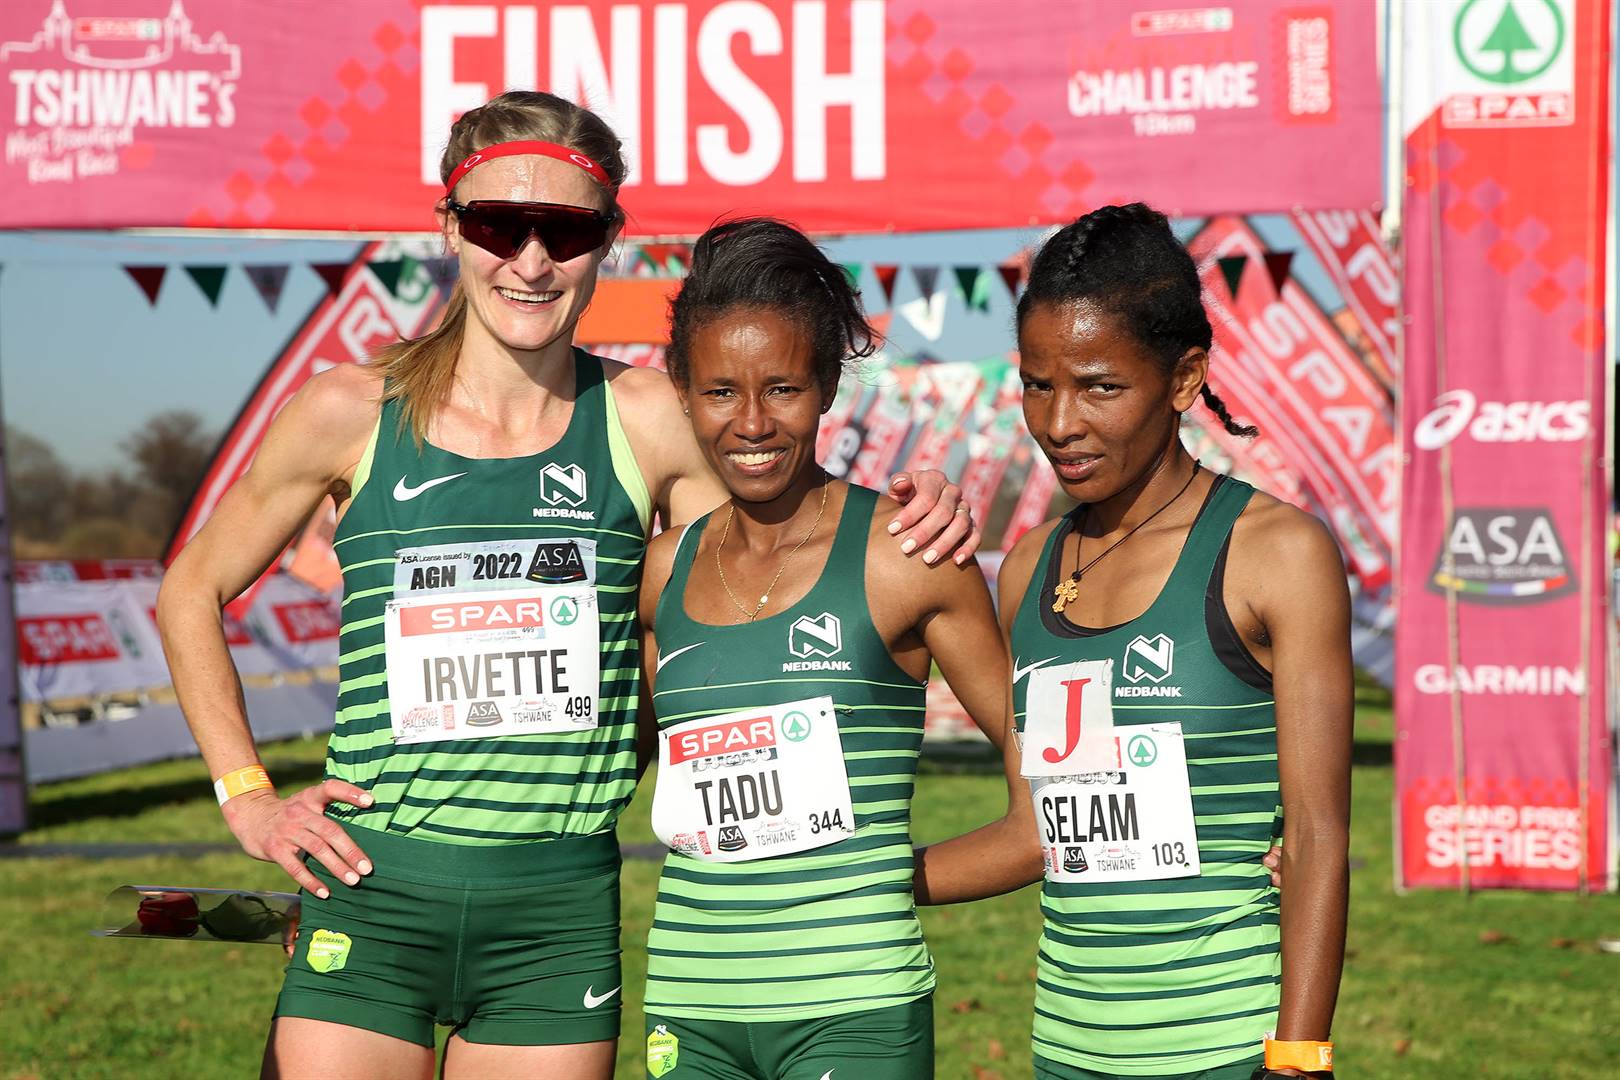 The top three finishers of the Tshwane Spar Grand Prix race in Irene on Saturday (from left) Irvette van Zyl, Tadu Nare and Selam Gebre. Photo: Reg Caldecott